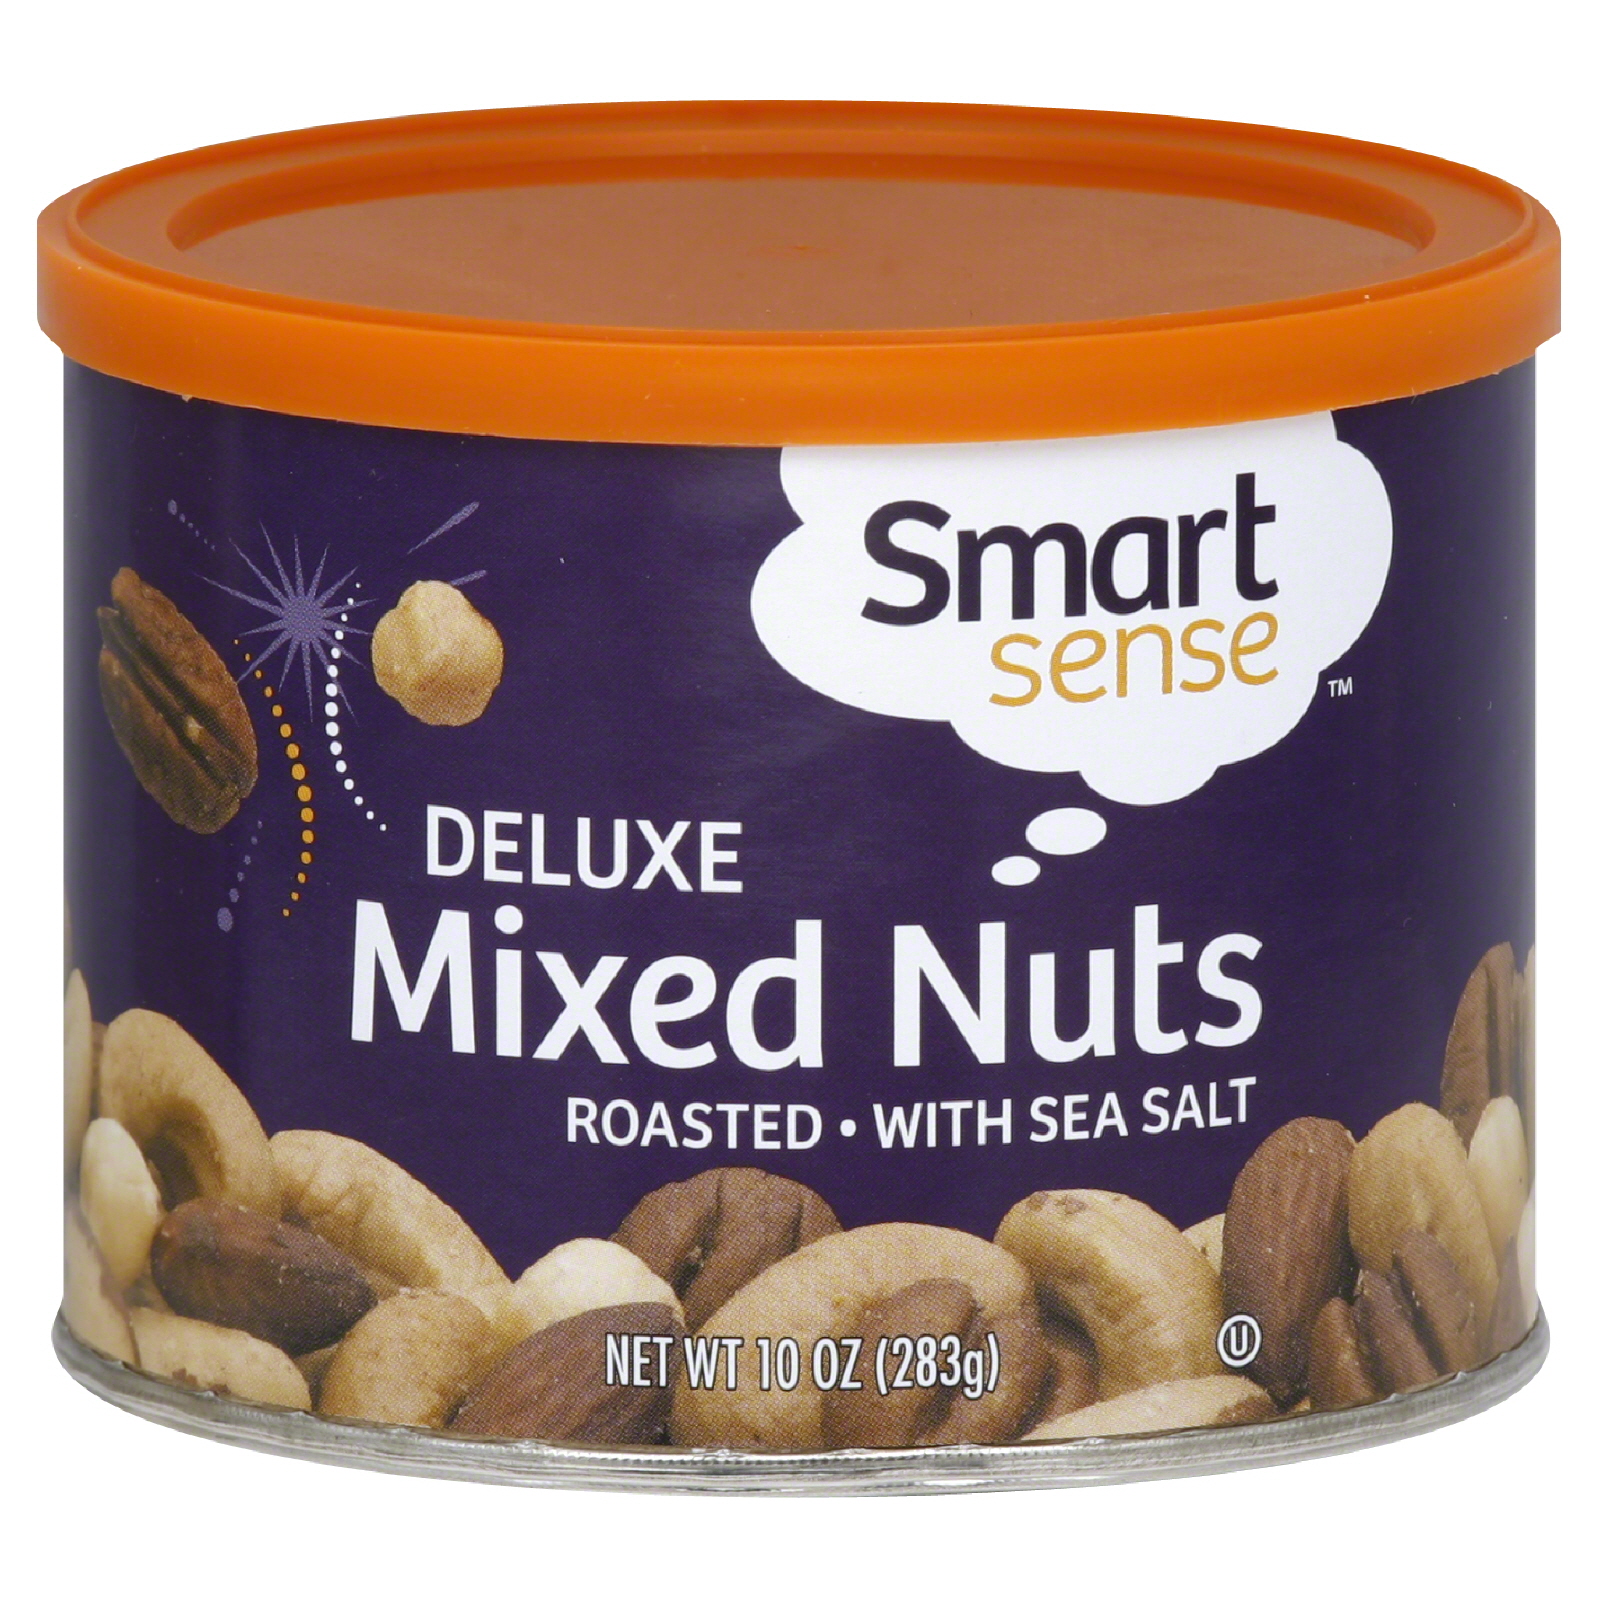 Smart Sense Mixed Nuts, Deluxe, Roasted, With Sea Salt 10 oz (283 g)